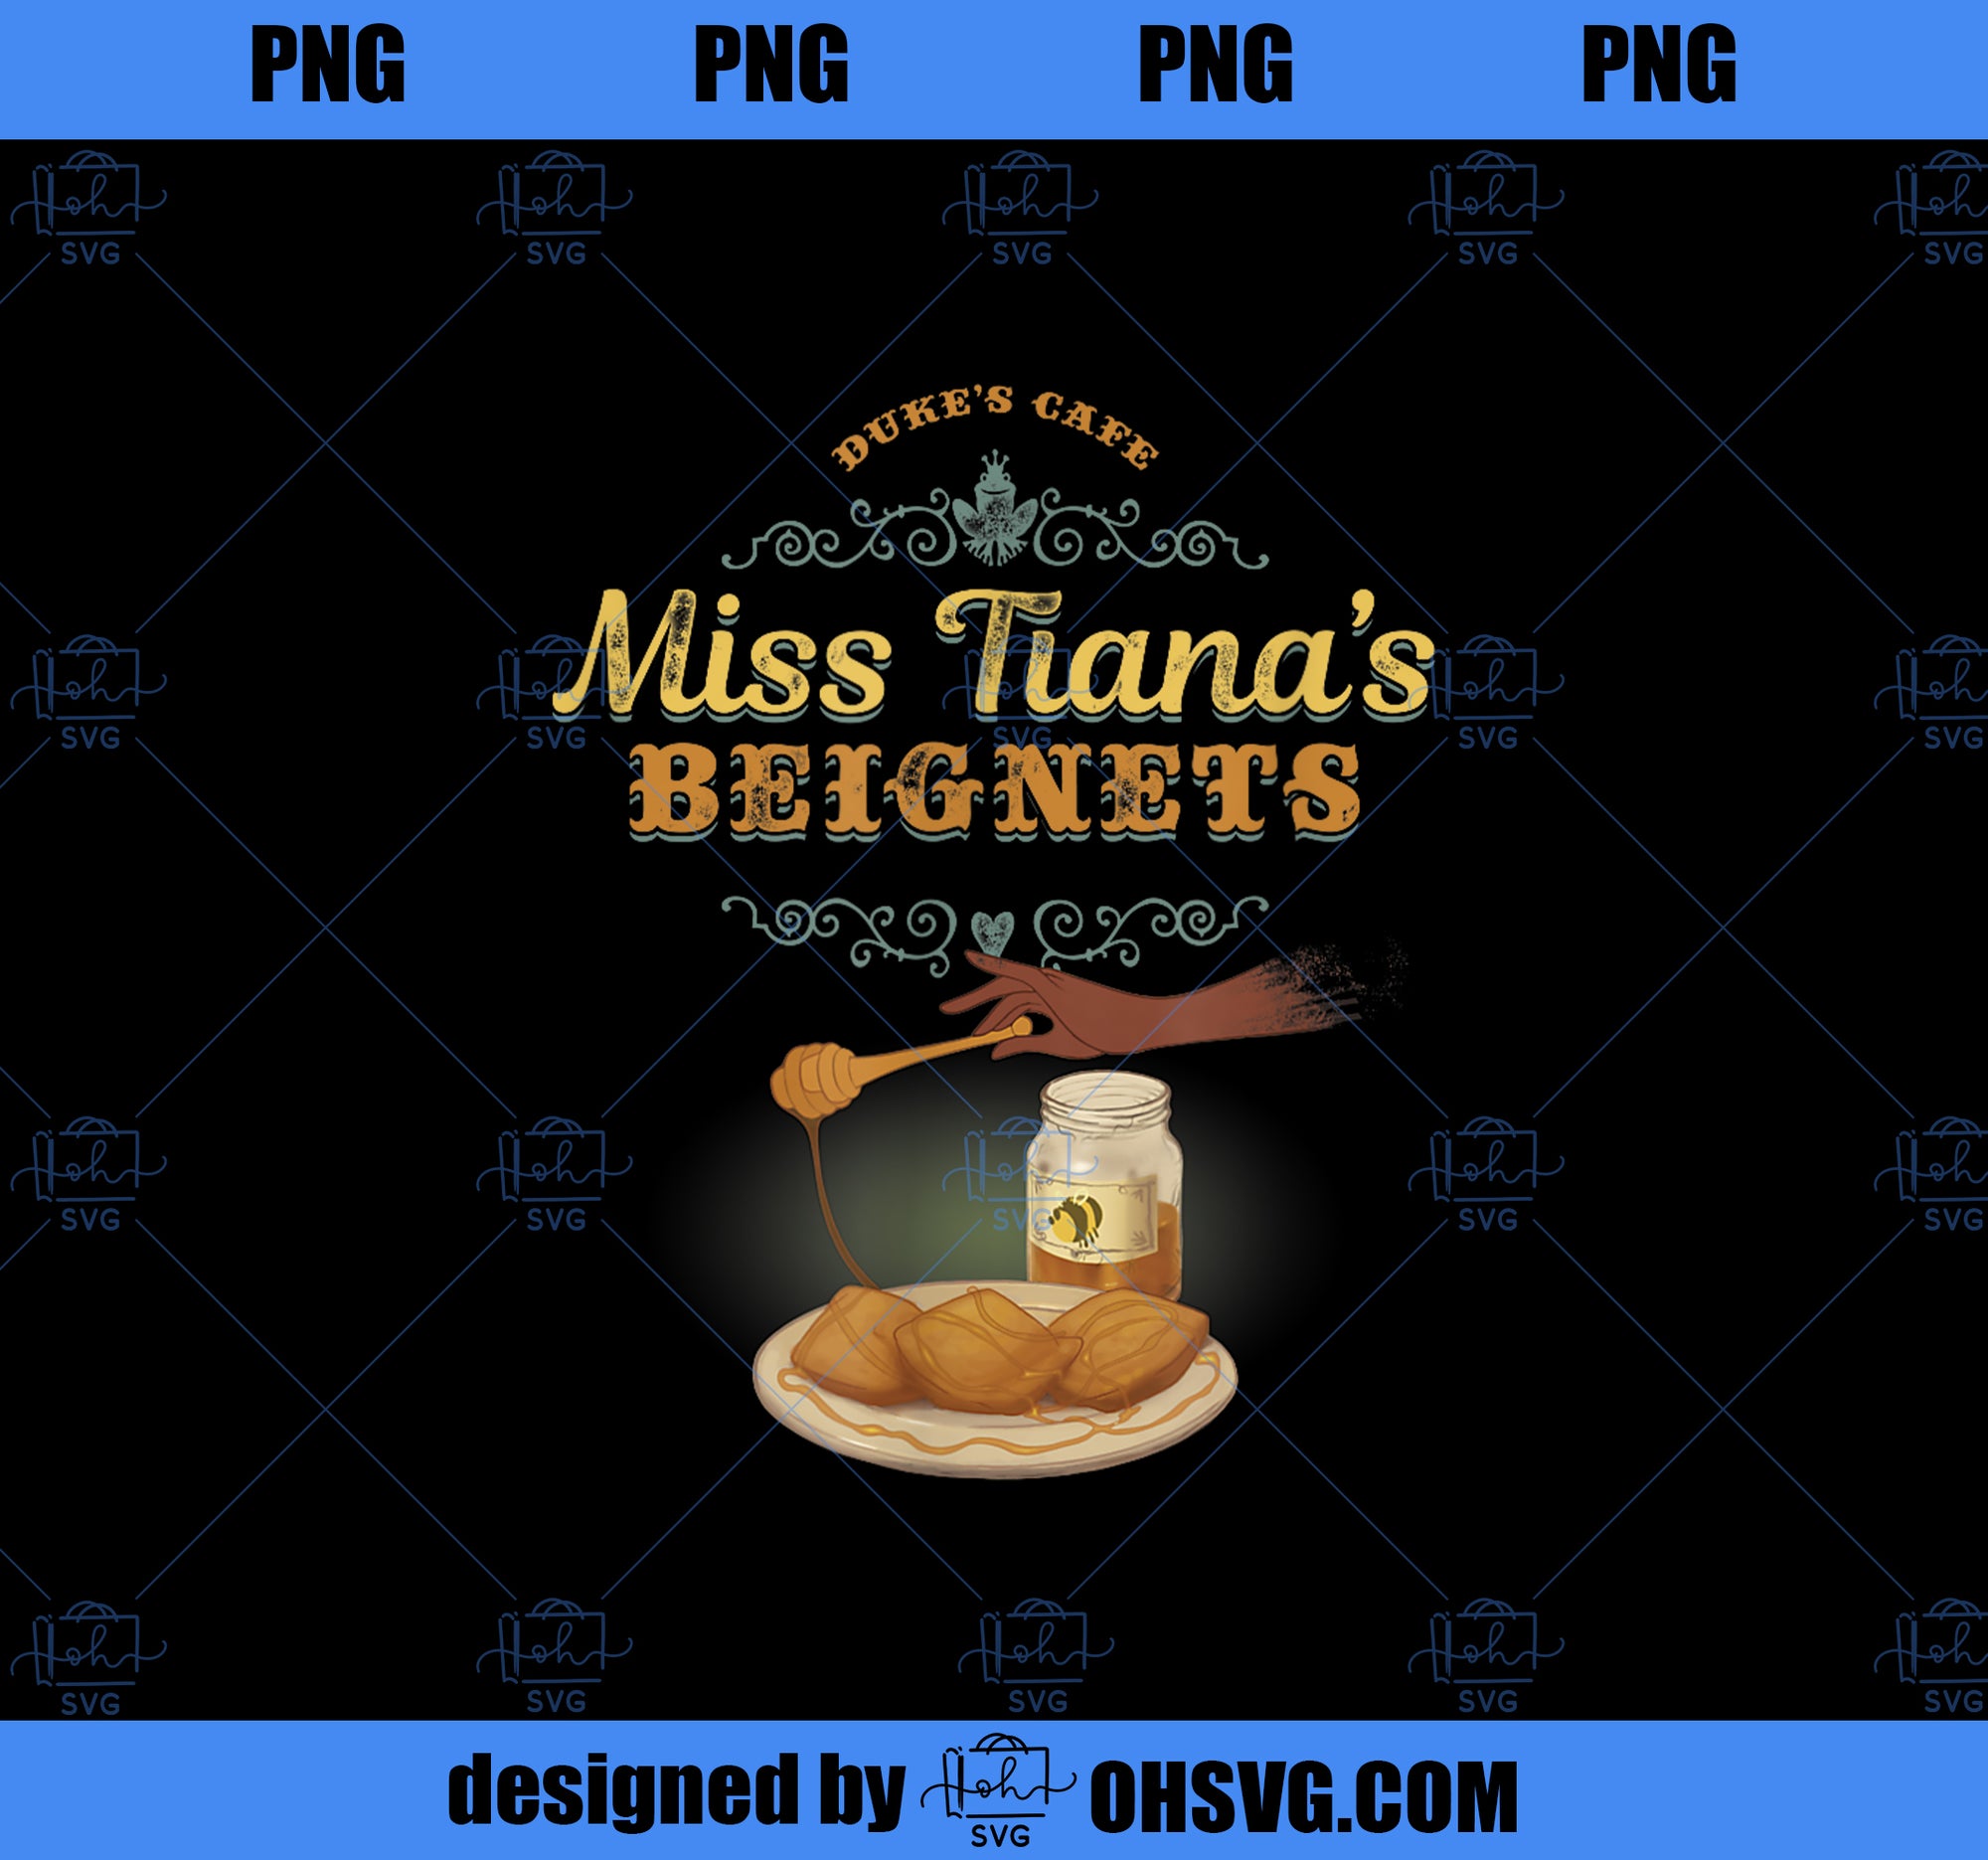 Disney The Princess And The Frog Miss Tiana_s Beignets PNG, Disney PNG, Princess PNG